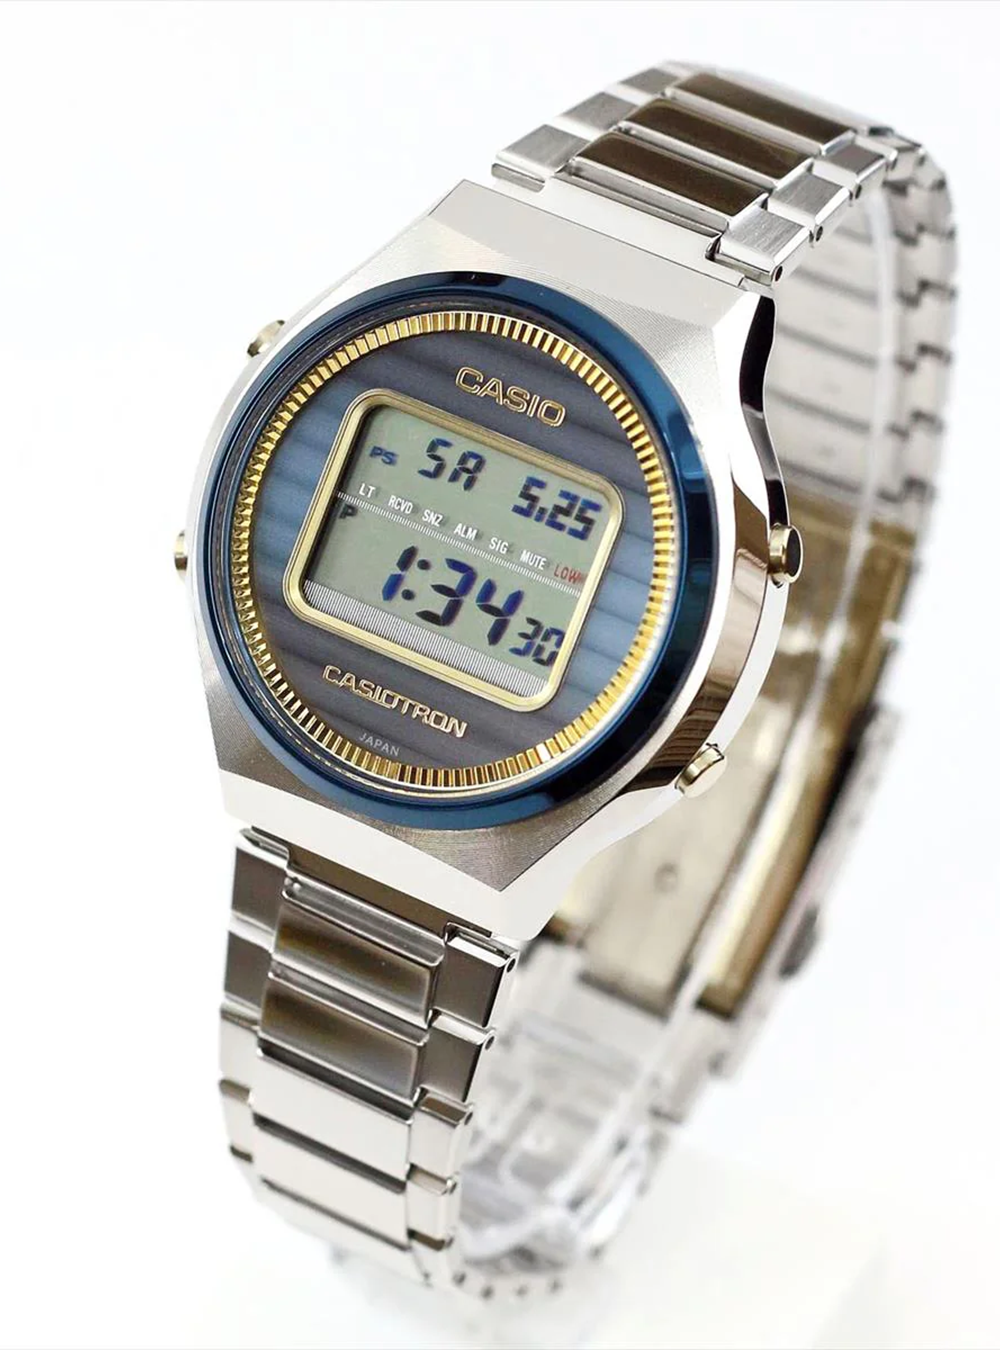 CASIO WATCH 50TH ANNIVERSARY CASIOTRON TRN-50SS-2AJR LIMITED EDITION MADE  IN JAPAN JDM